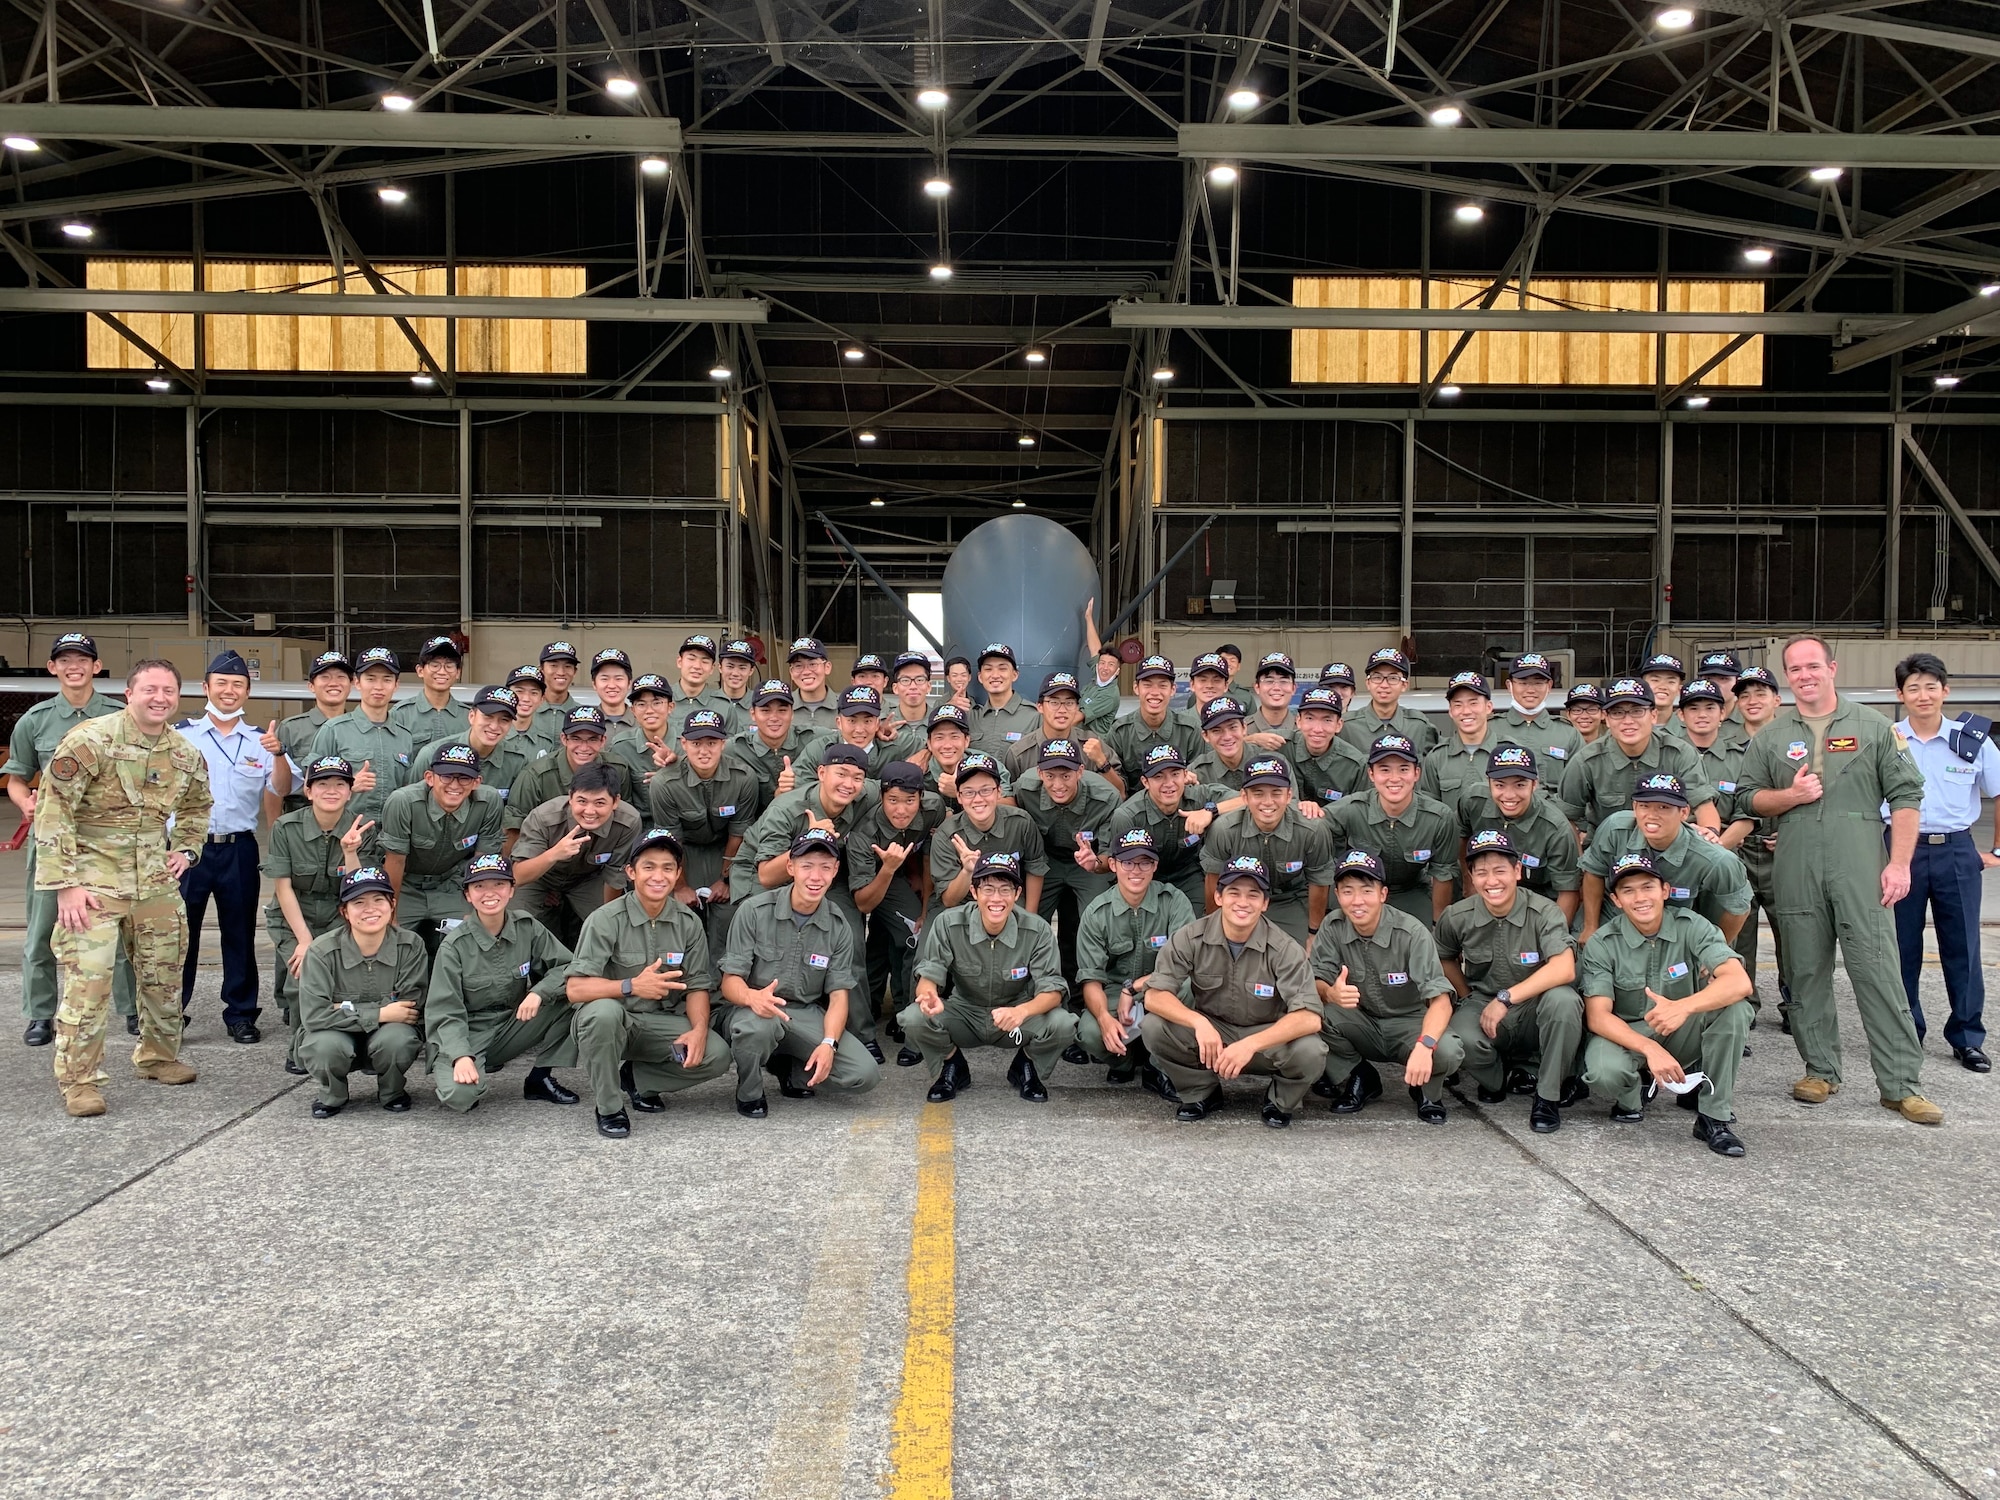 Japan National Defense Academy cadets and members of the 4th Reconnaissance Squadron from Andersen Air Base, Guam, pose for a group photo in front of a U.S. Air Force RQ-4 Global Hawk aircraft July 26 at Yokota Air Base, Japan. Japan recently purchased several Global Hawks under a foreign military sales program. (Courtesy photo)